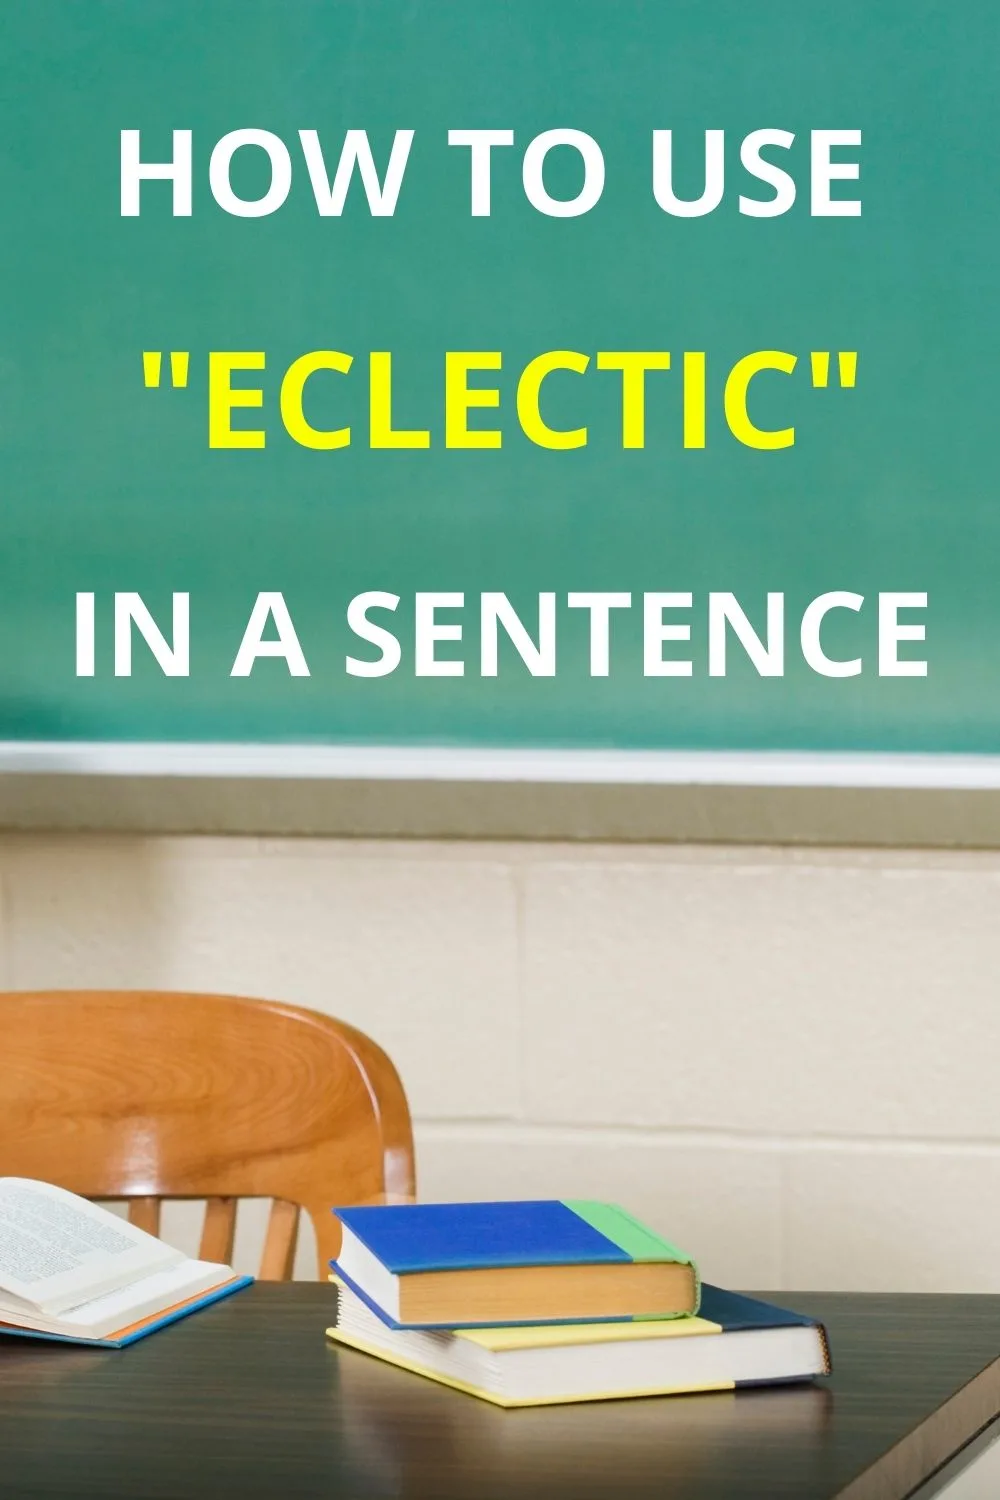 How To Use eclectic in a Sentence